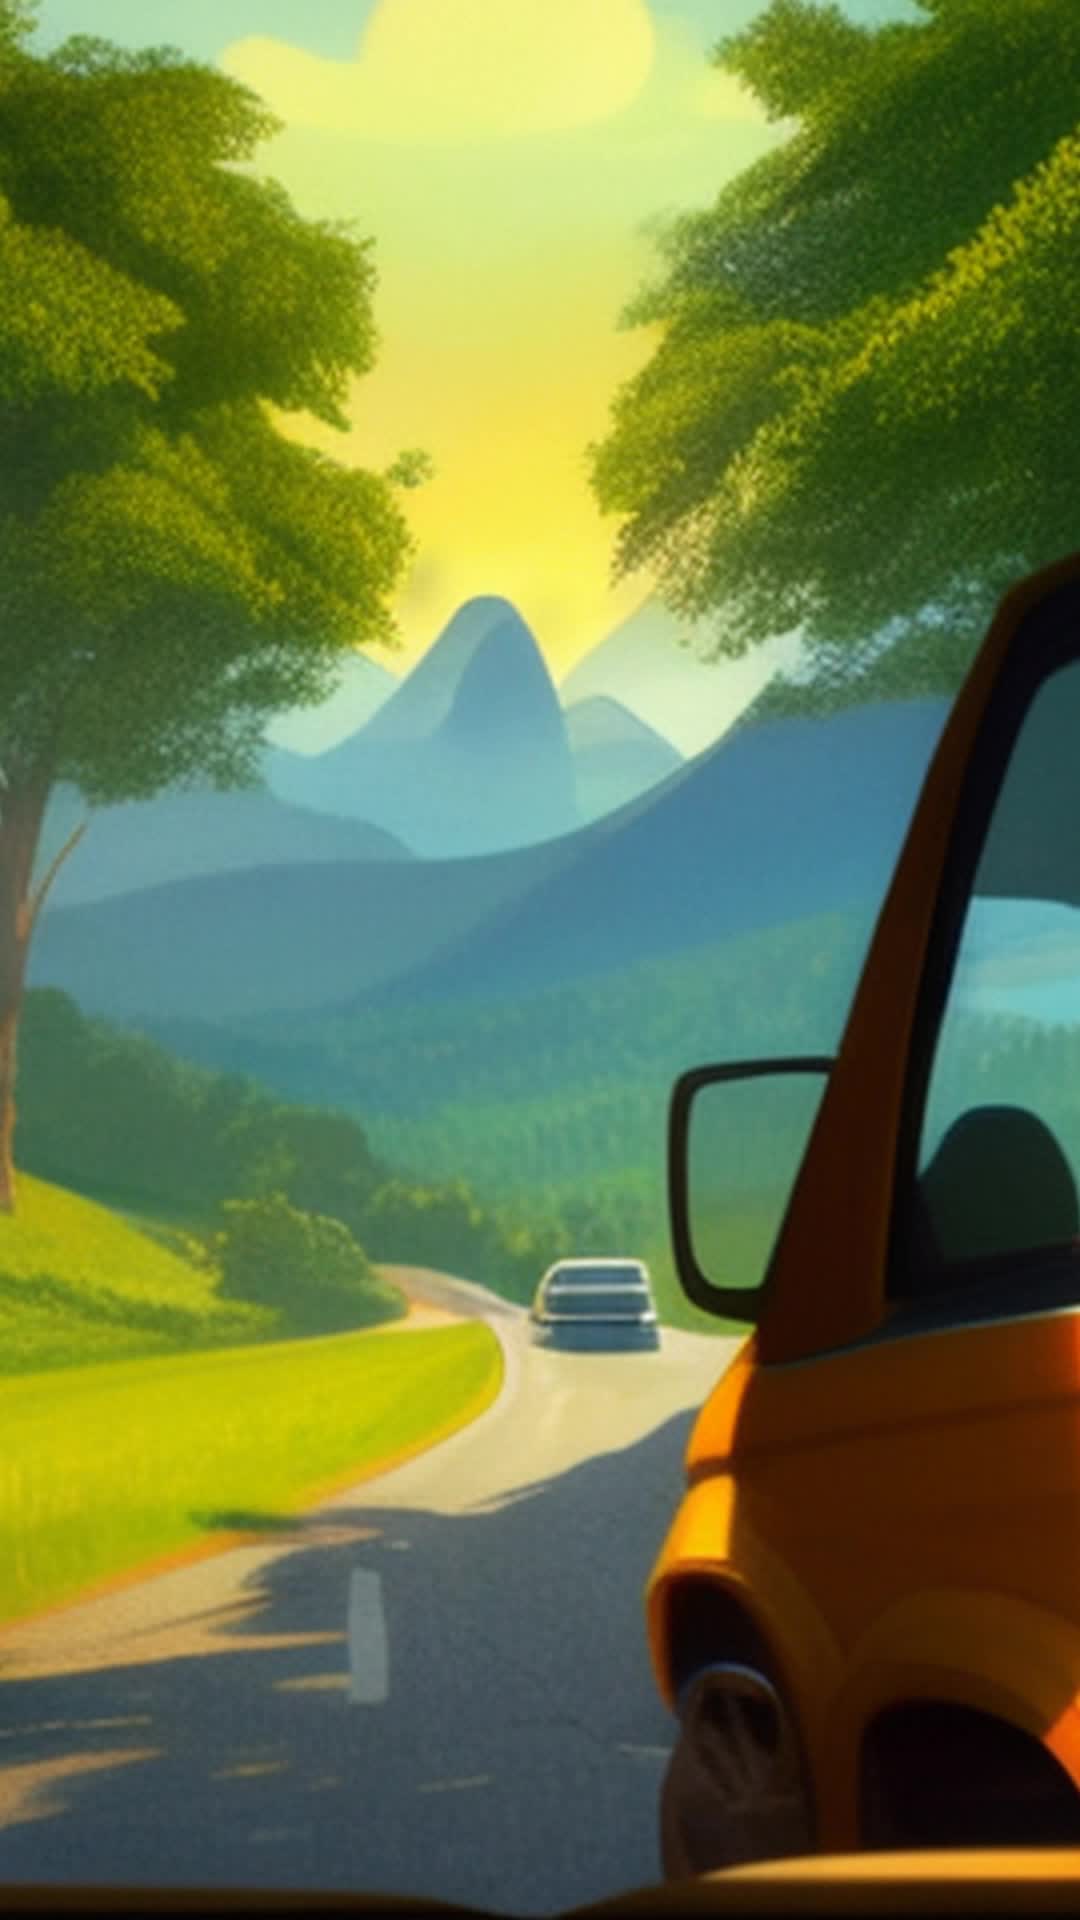 Twisting road, Mike and daughter in car, integrating surrounding sceneries into conversation, discussions of fantasy world, lush green forests passing by, distant mountains, warm evening light seeping through windows, creative expressions, detailed, side view